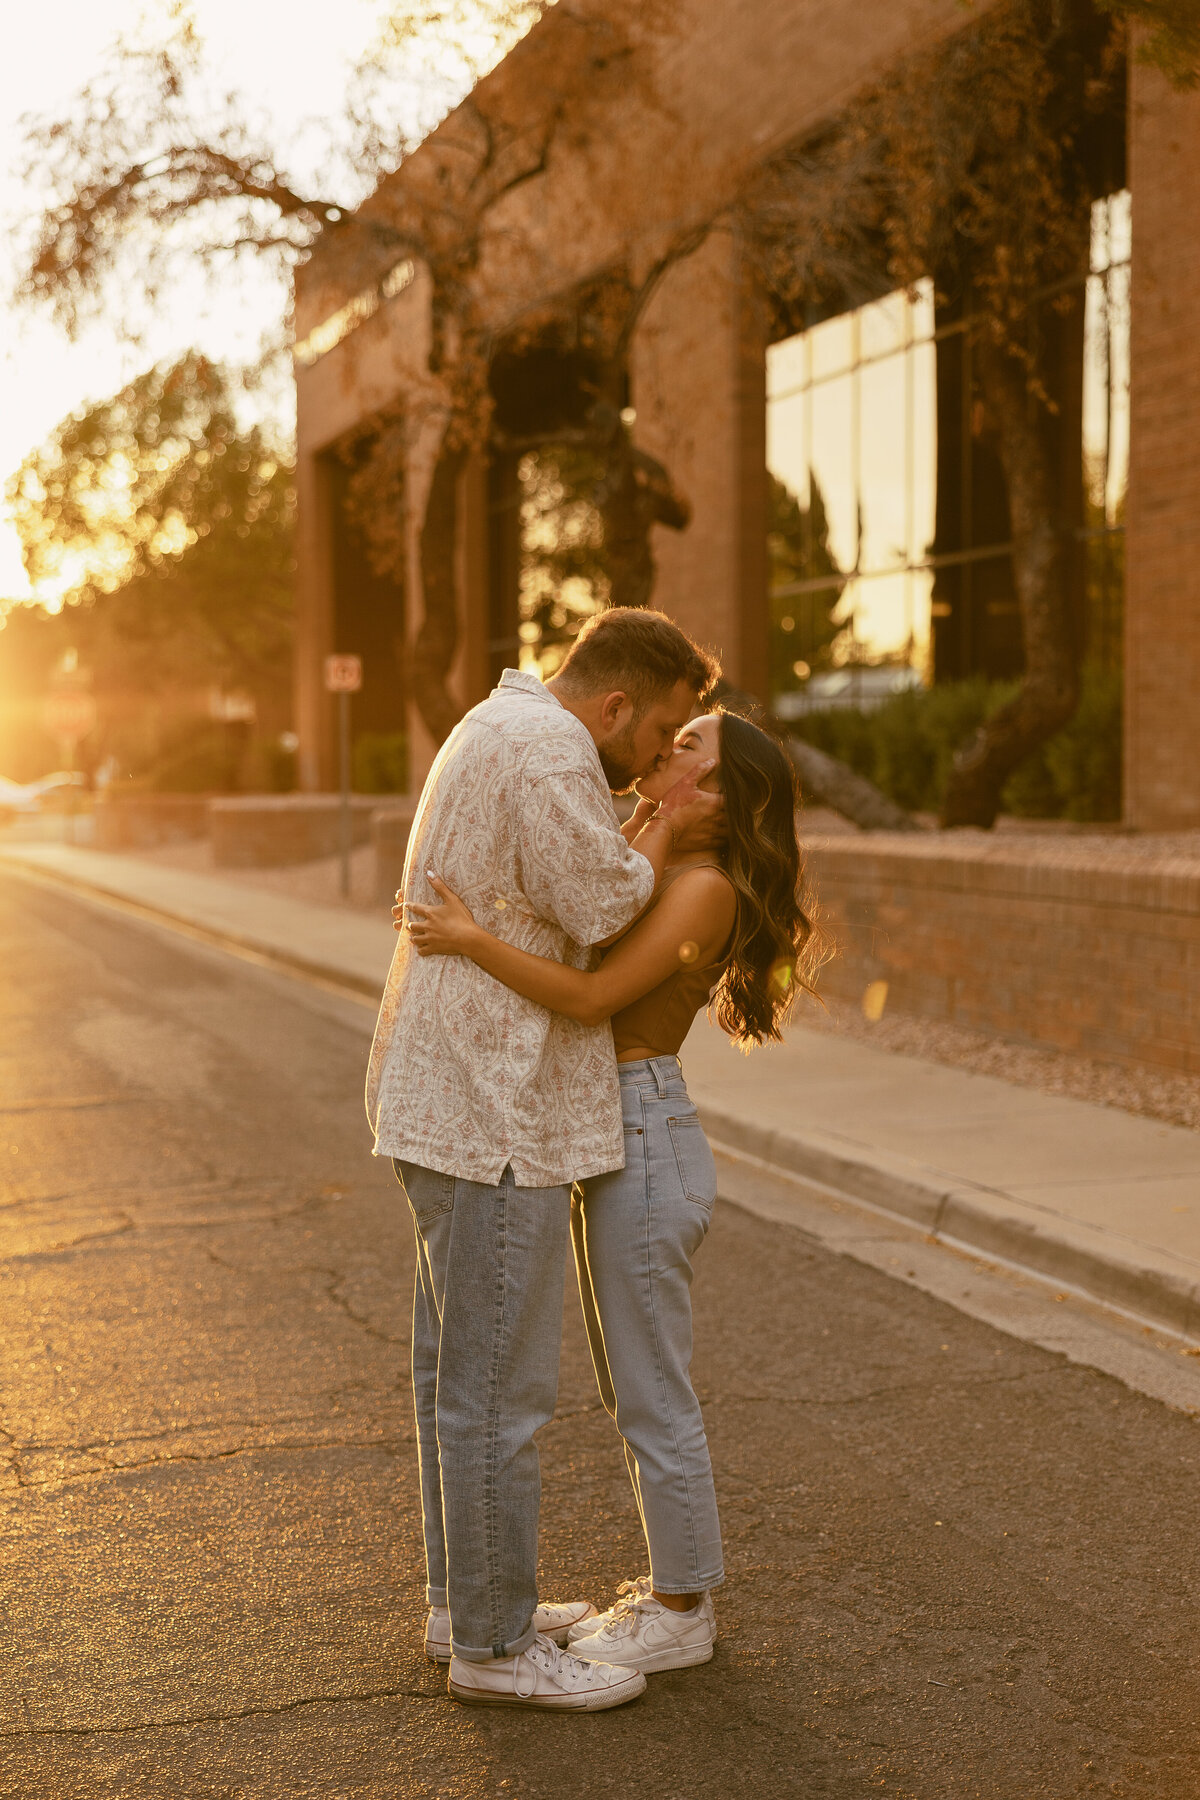 A couple standing in the street kissing at sunset.